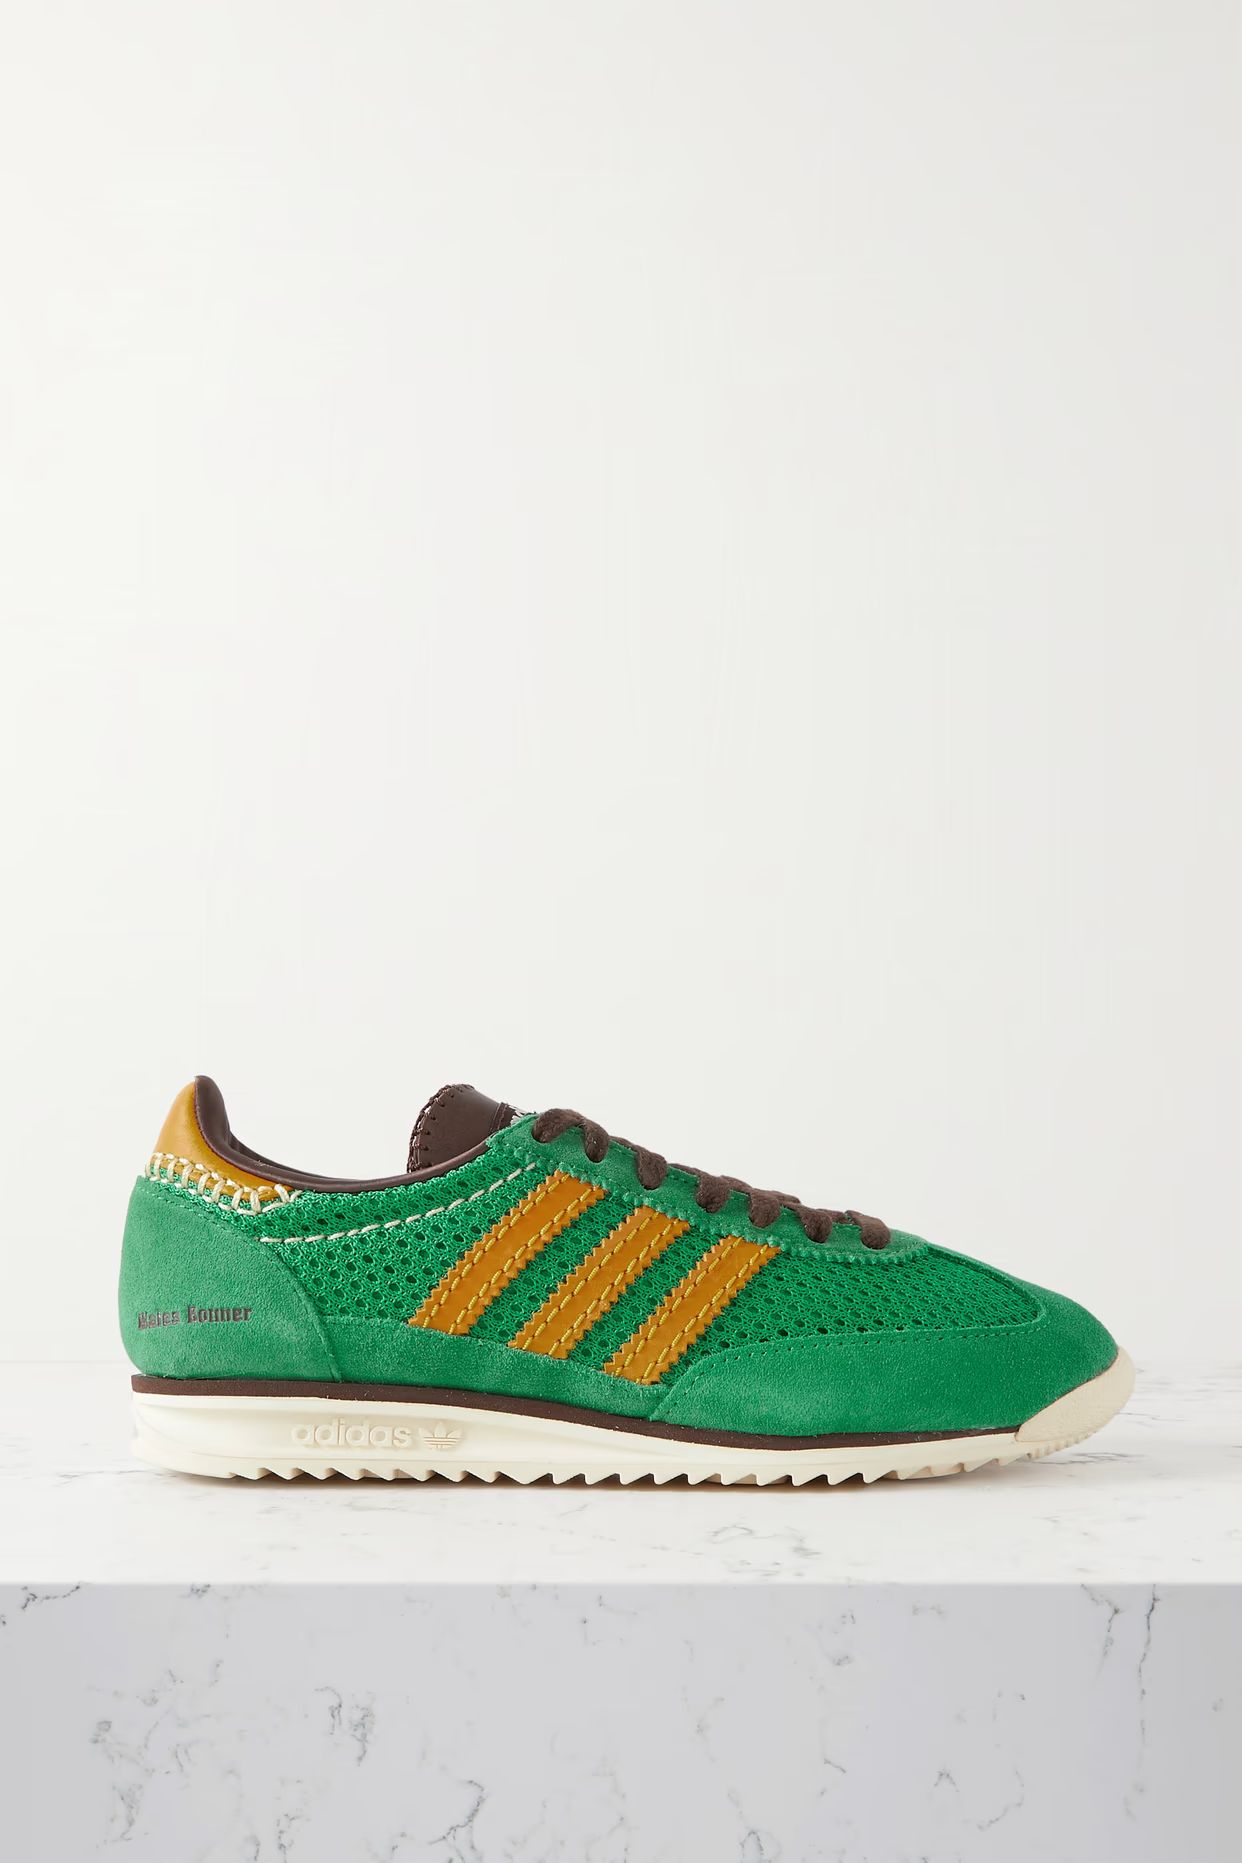 adidas Originals - + Wales Bonner Sl72 Leather-trimmed Suede And Mesh Sneakers - Green | NET-A-PORTER (UK & EU)